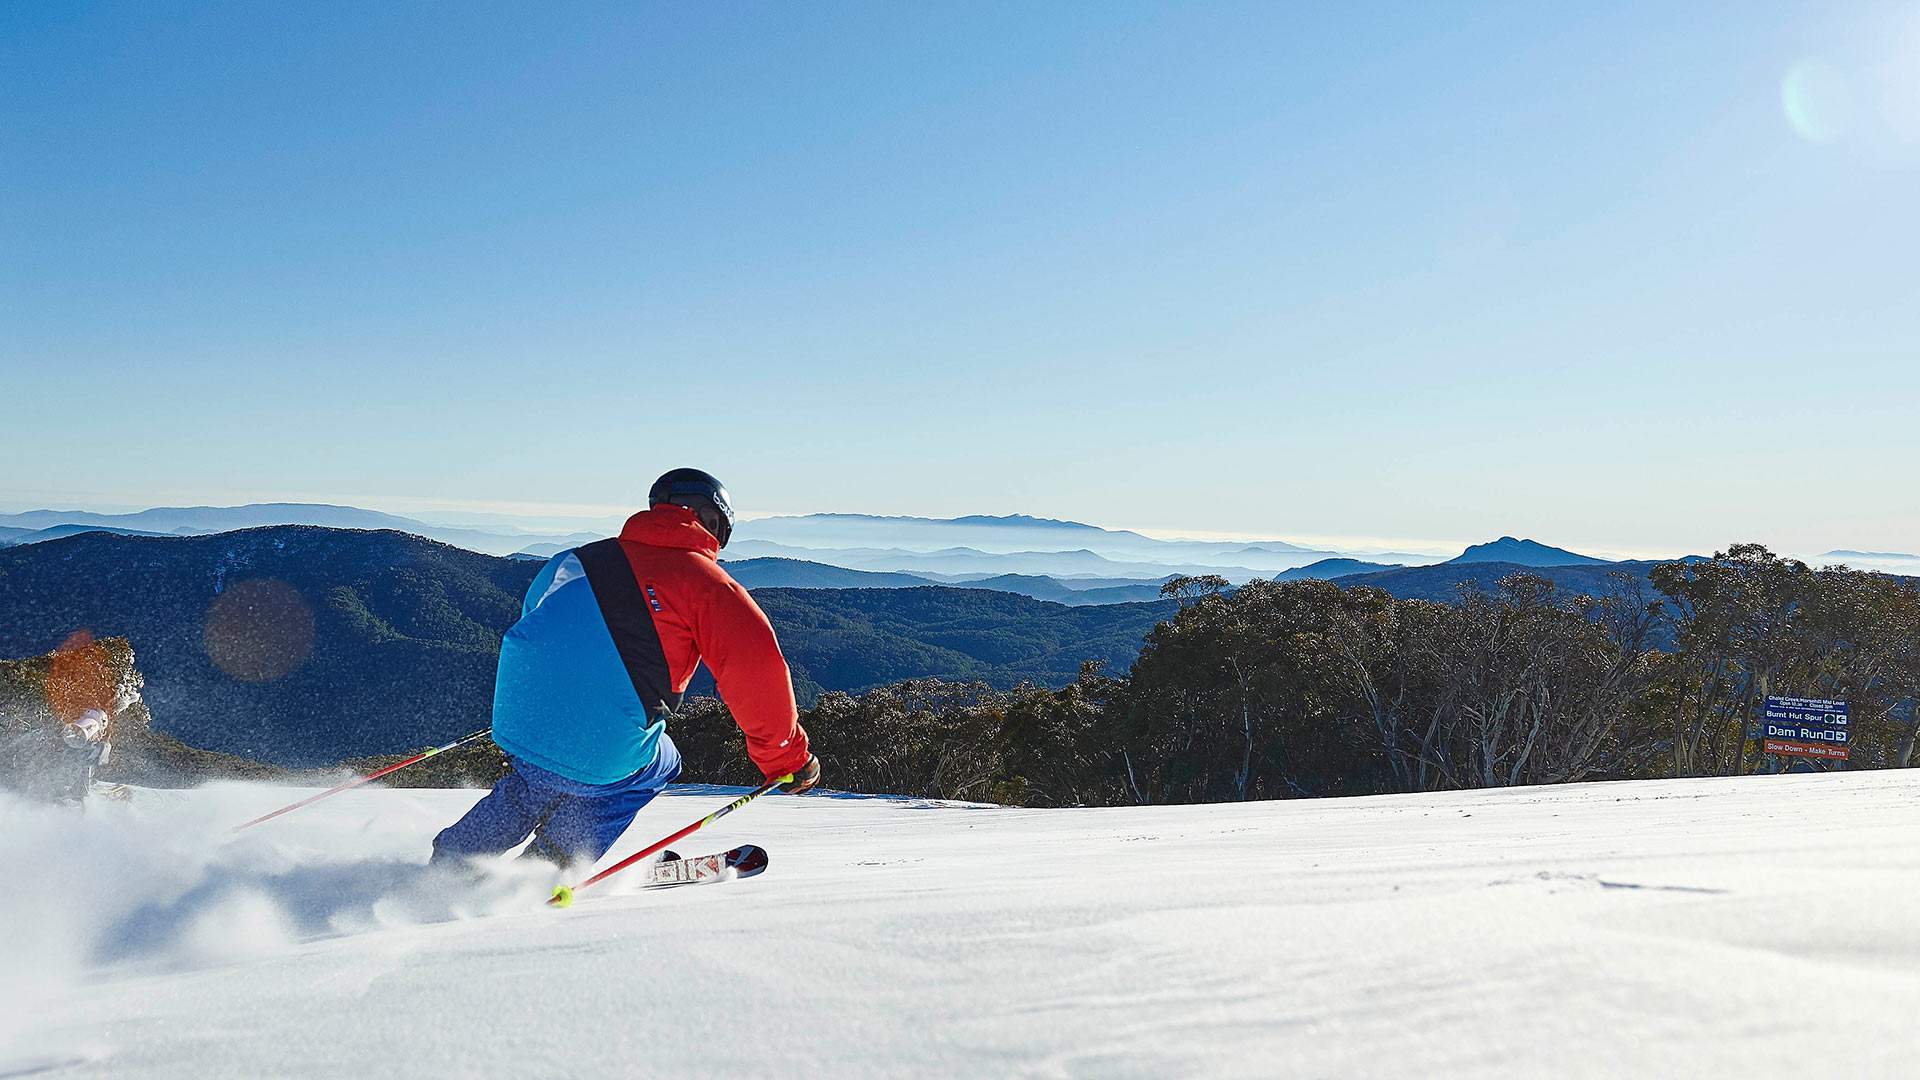 Five Snow Activities to Add to Your Winter Calendar